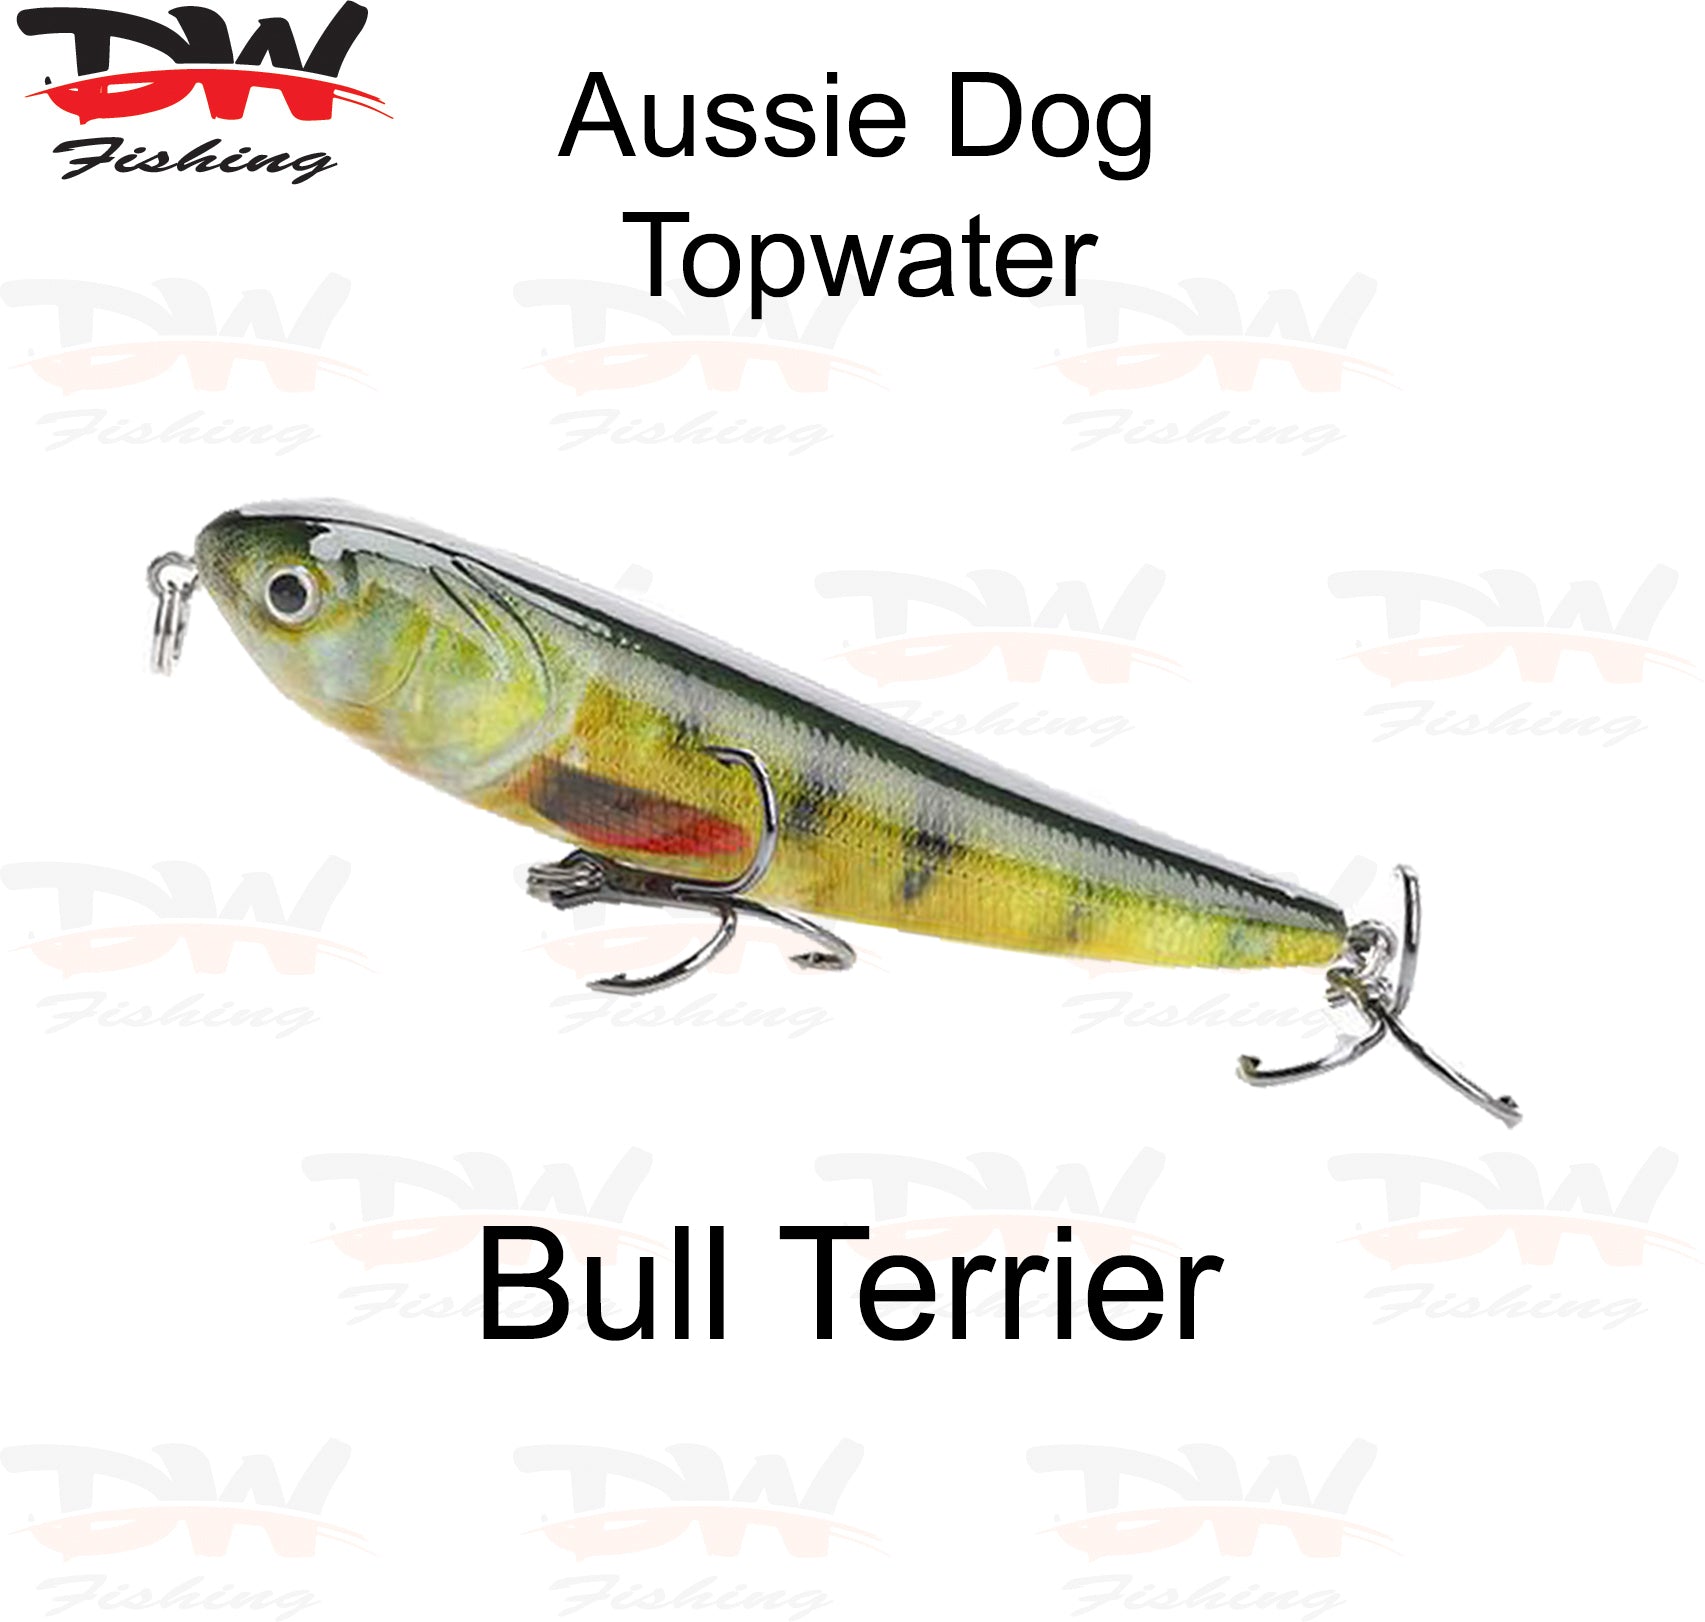 Walk the dog surface lure Aussie dog topwater 70mm single lure Bull Terrier is the colour name